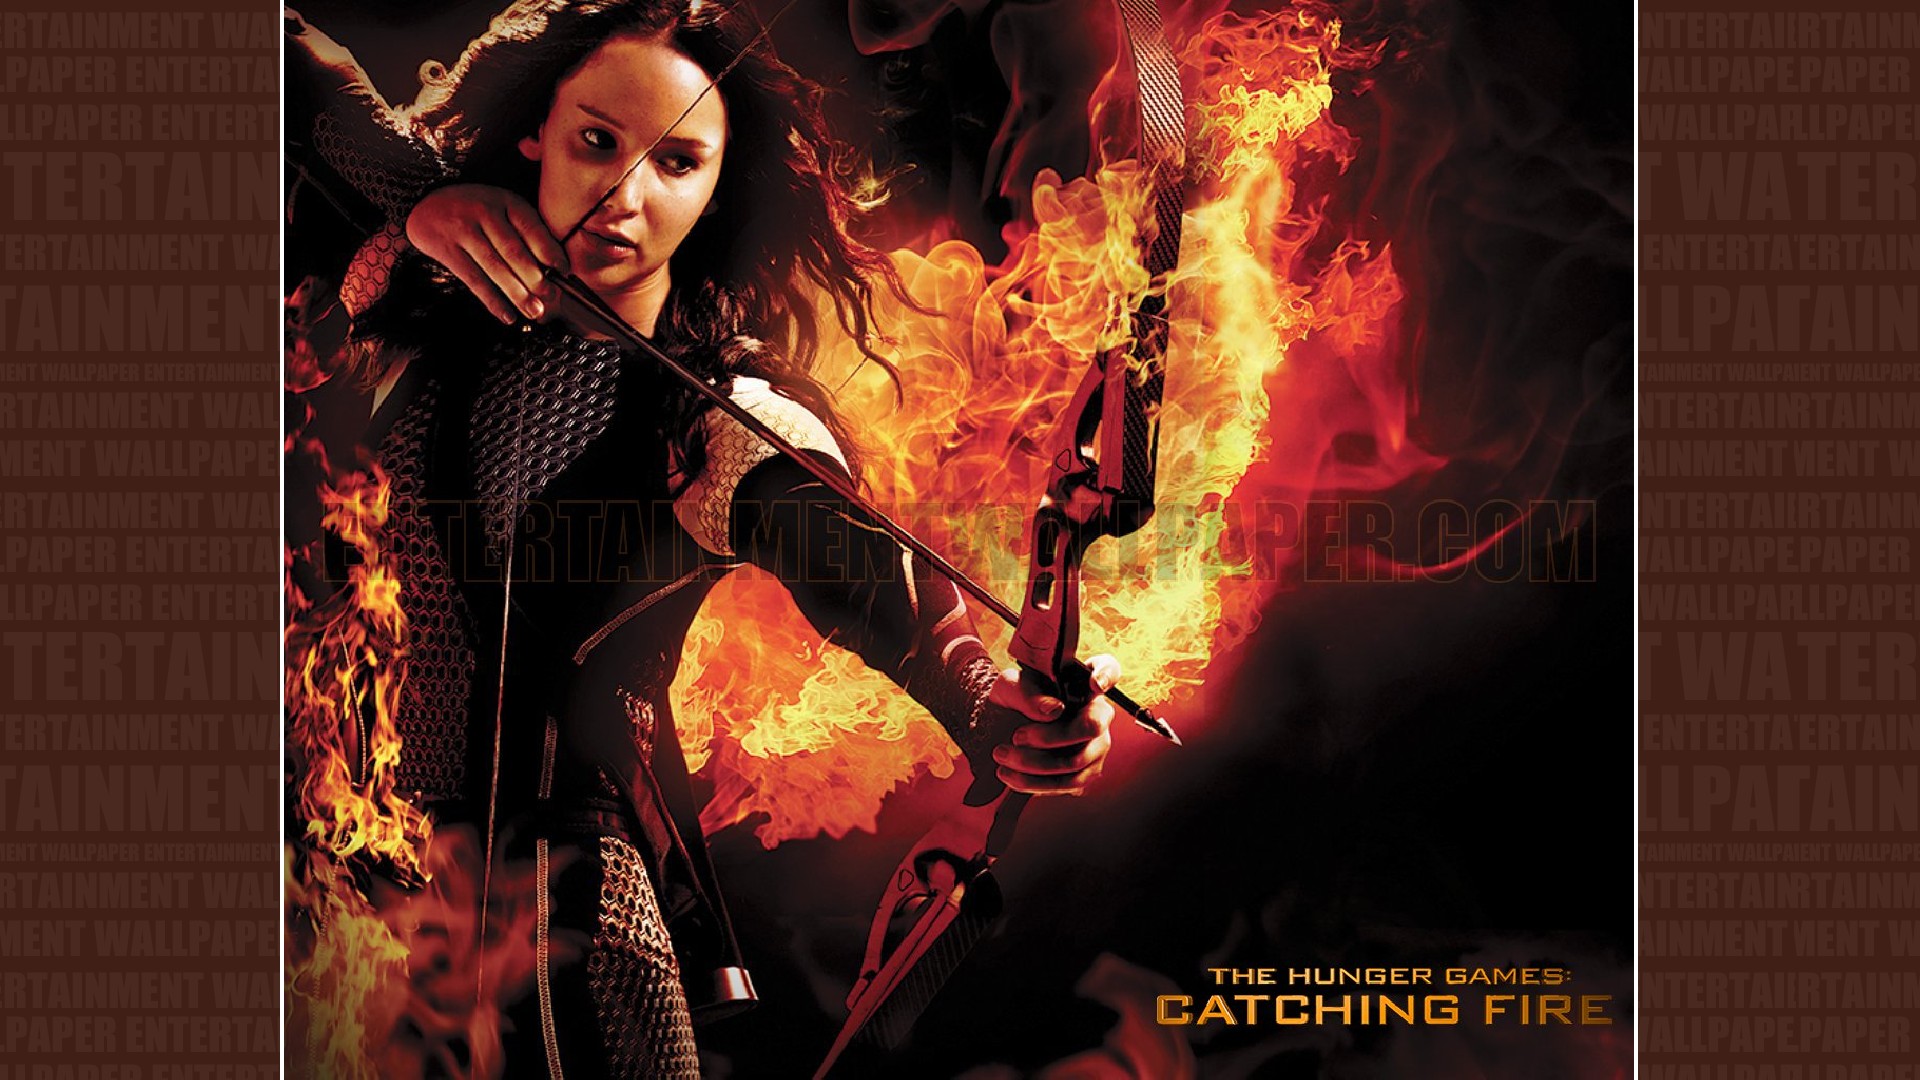 The Hunger Games Catching Fire Katniss Wallpaper HD Pictures